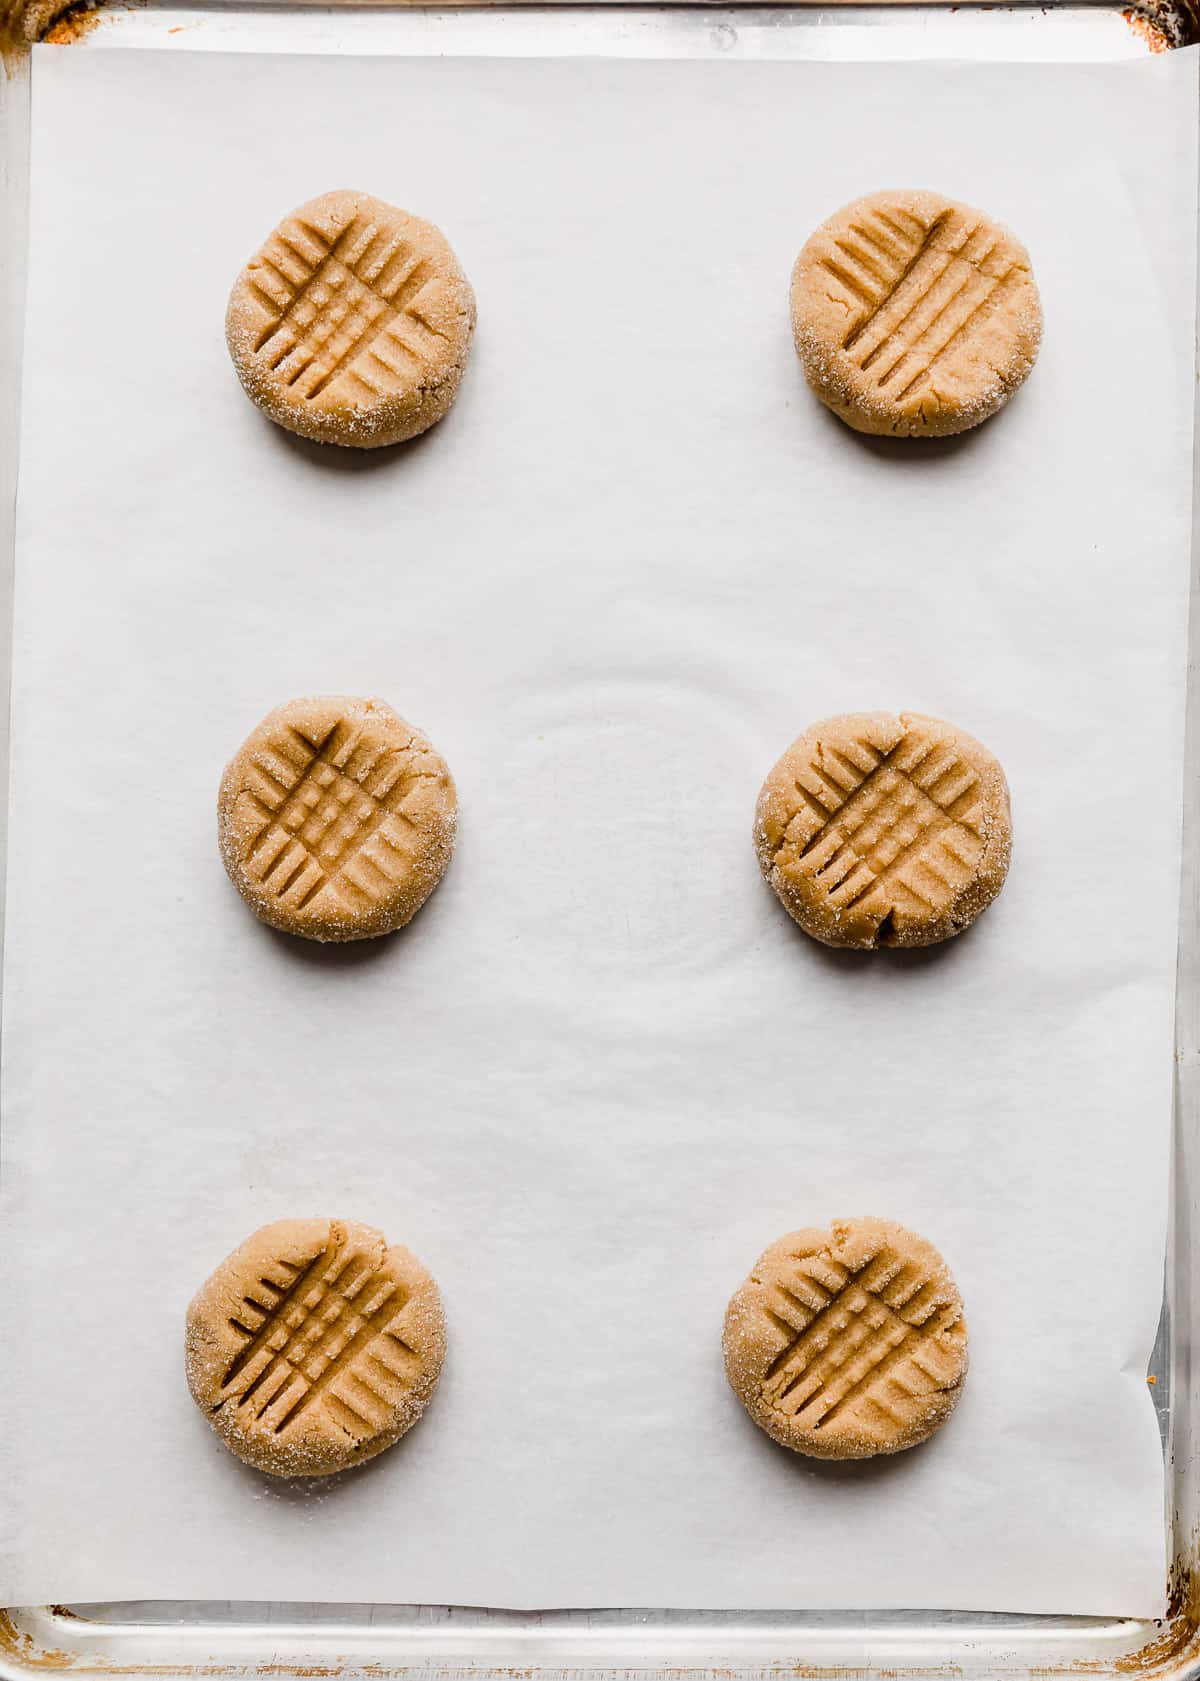 Six copycat Crumbl Classic Peanut Butter Cookies on a white parchment lined baking sheet.